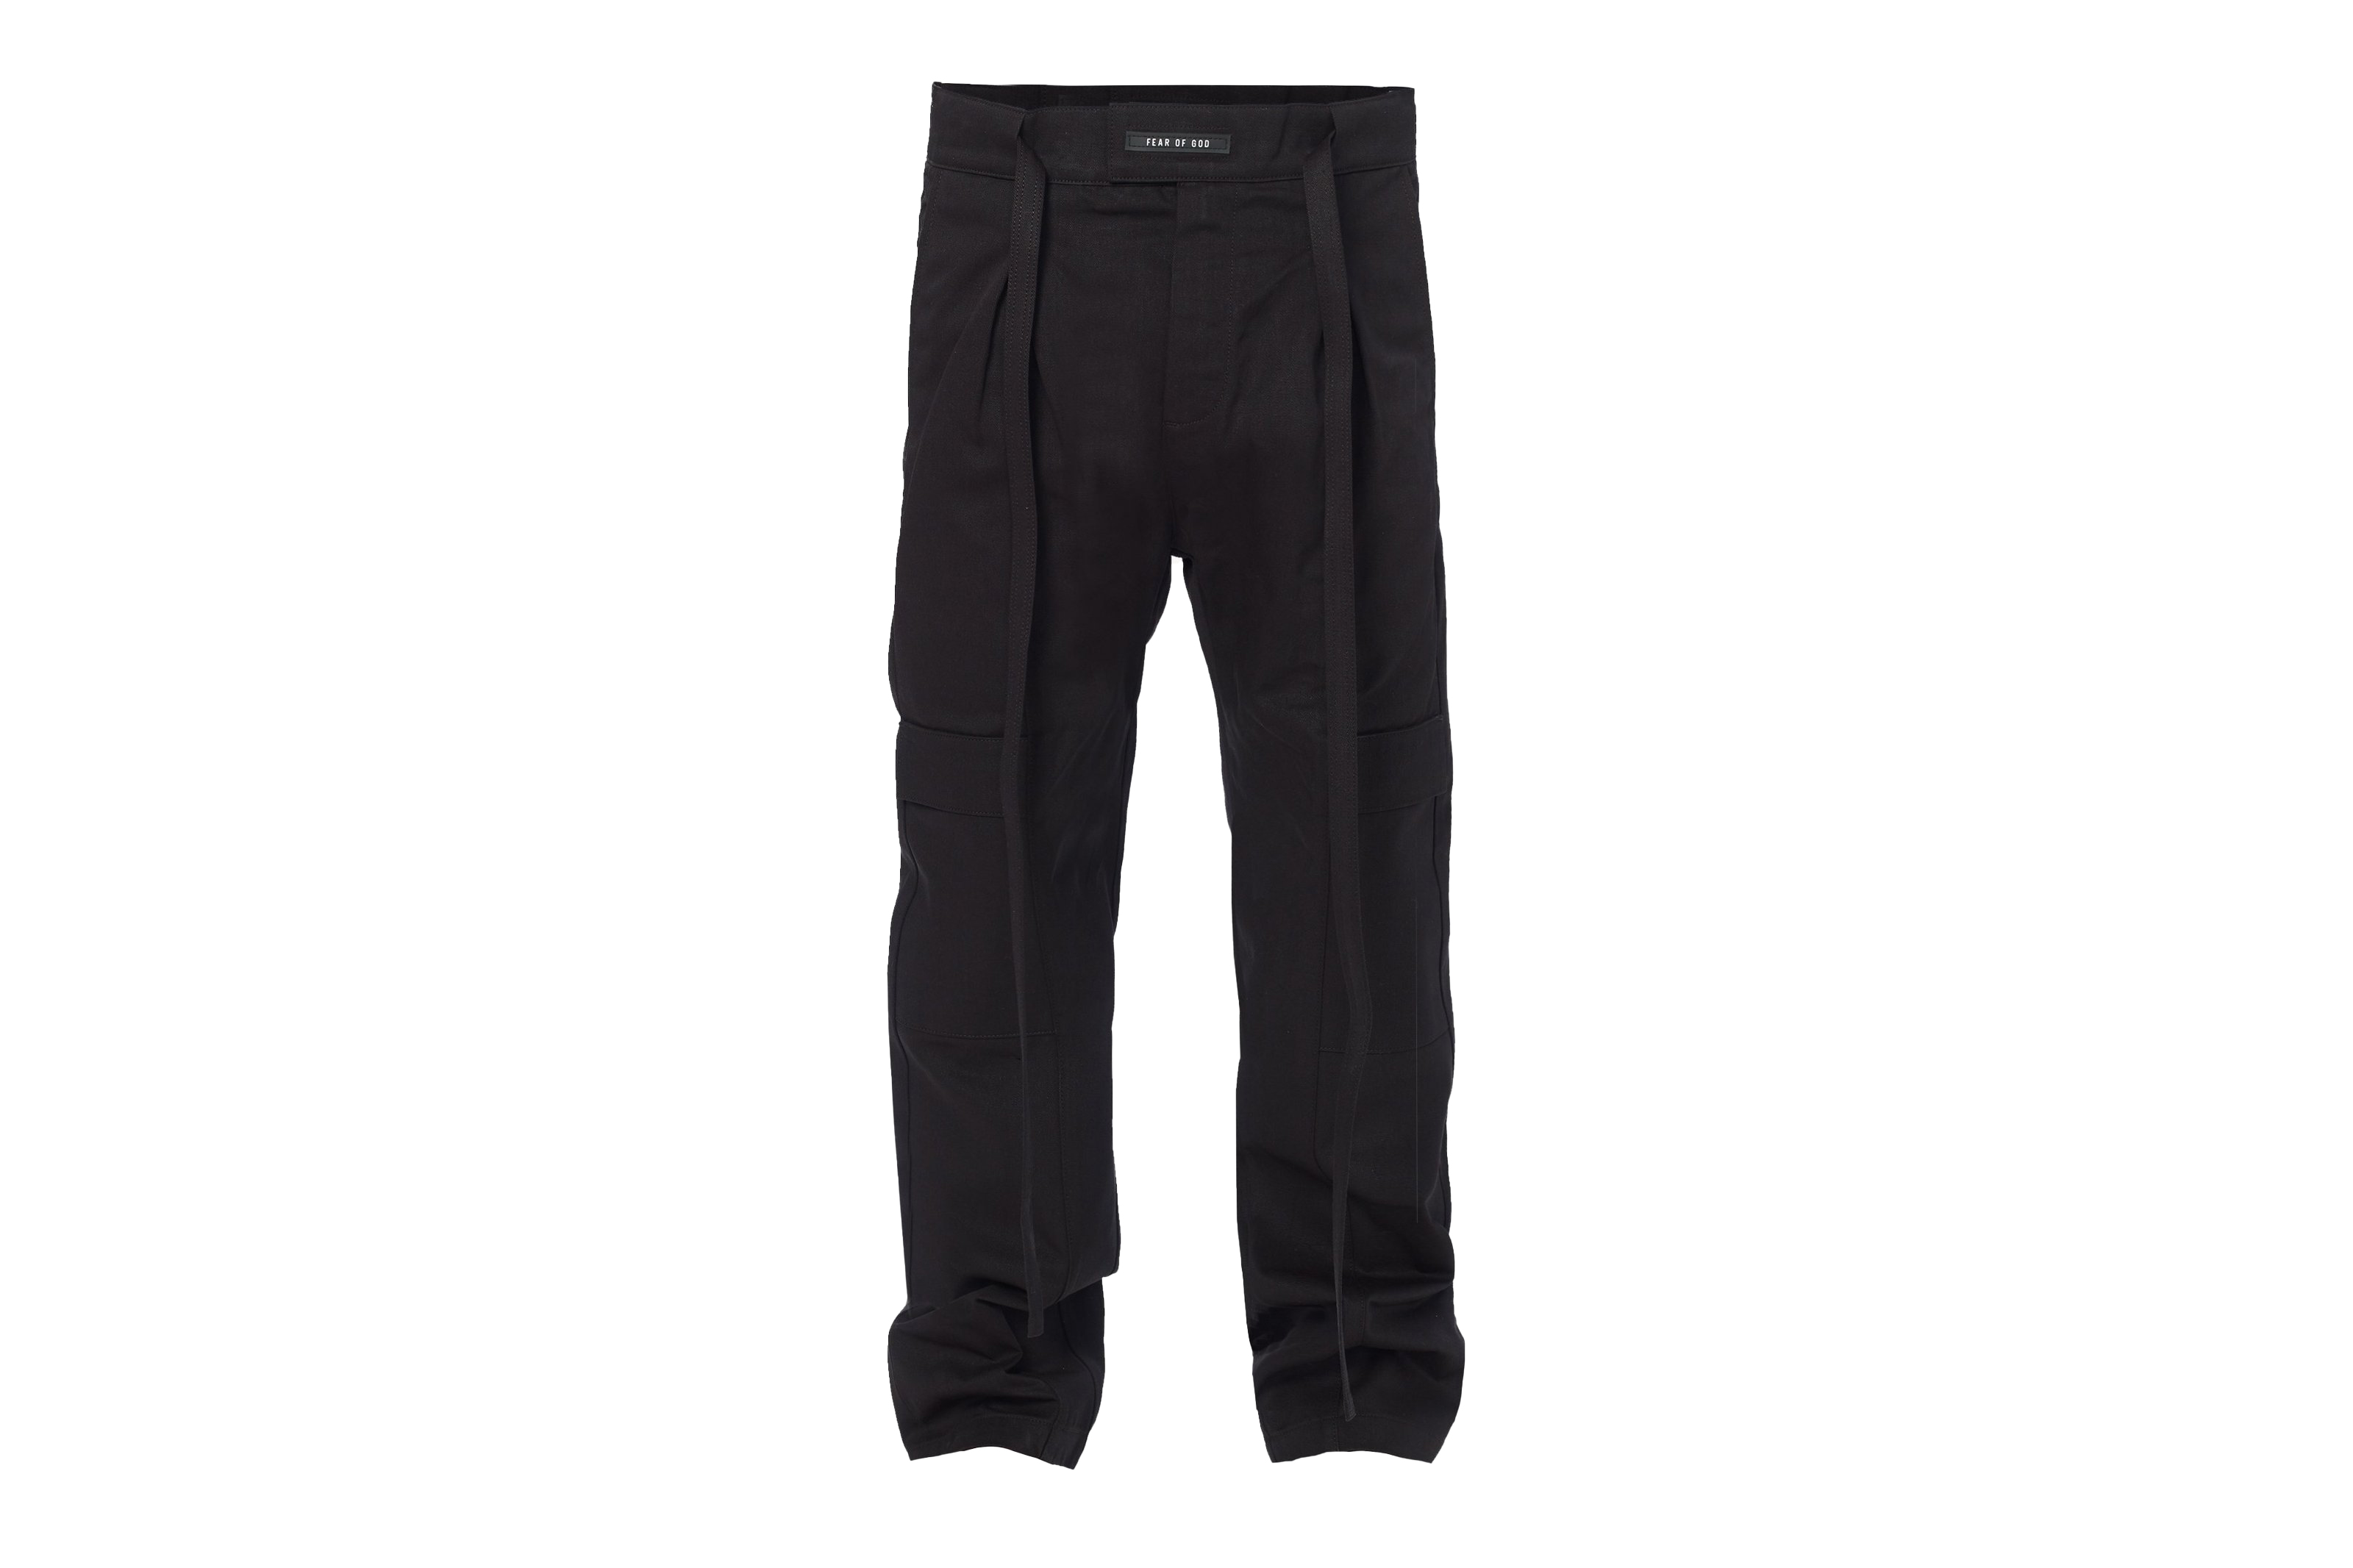 FEAR OF GOD Baggy Cargo Pants Black - SIXTH COLLECTION - JP